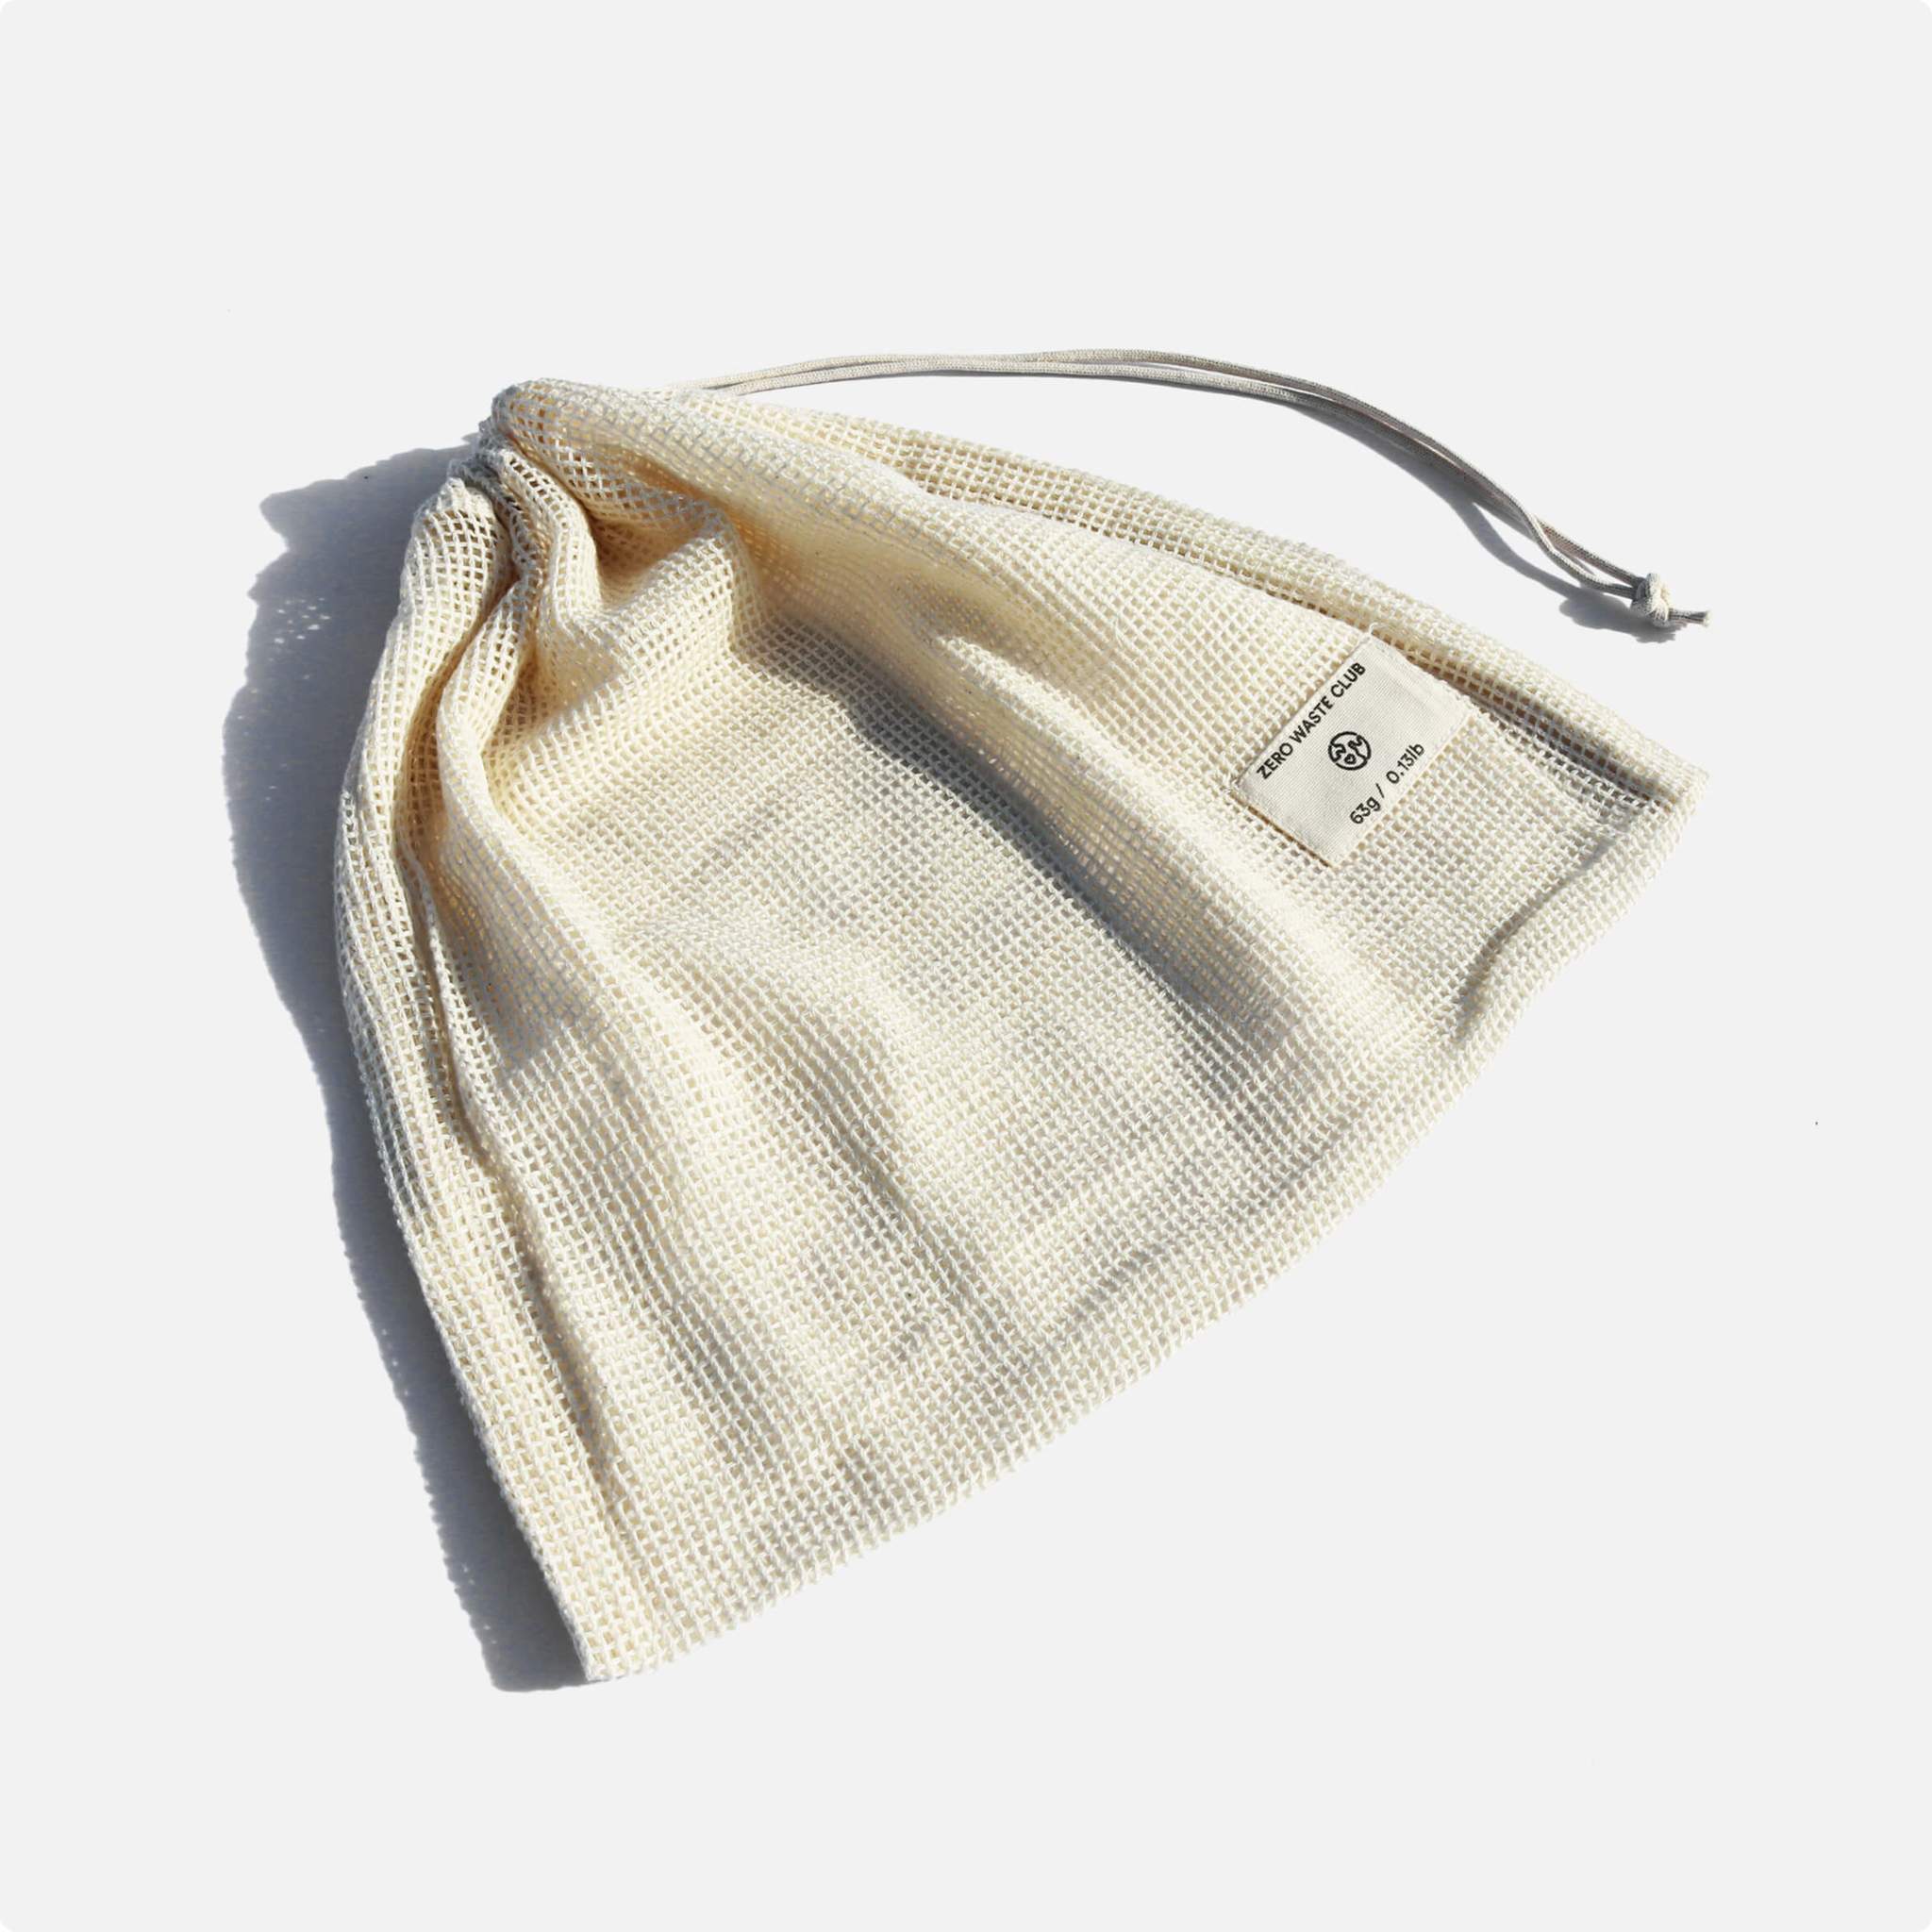 Pack of 9 Organic Cotton Mesh Bags